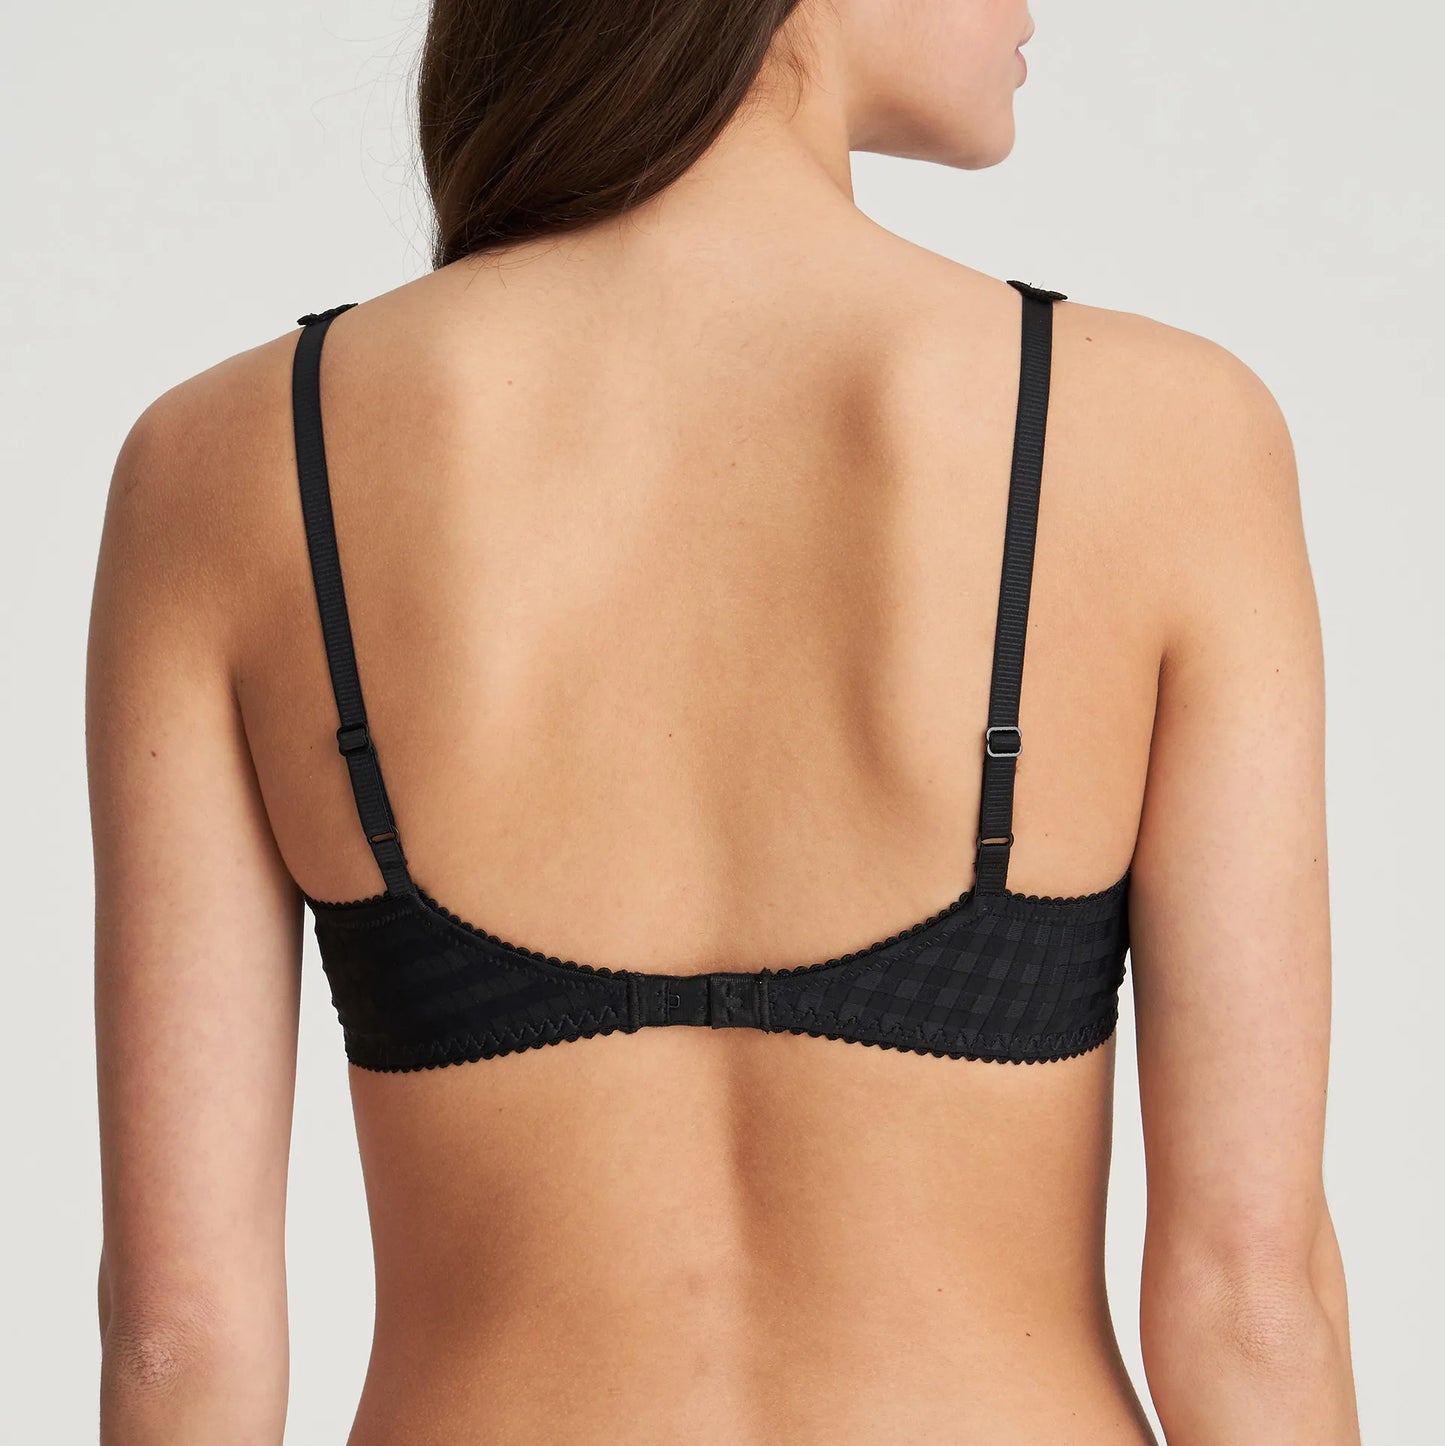 Avero Padded Round Bra in Black worn by model in back view product image